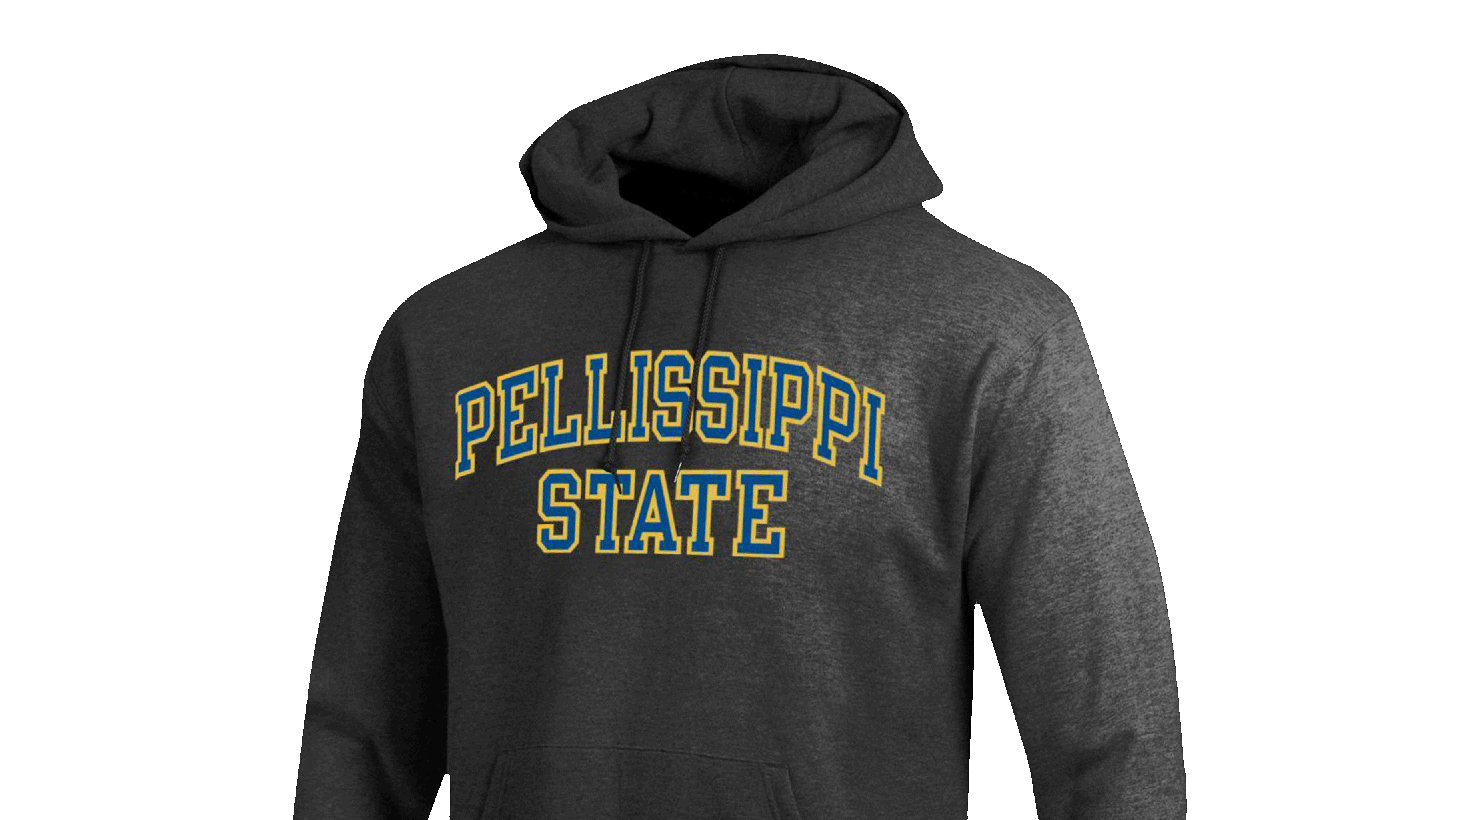 Pellissippi State CC Bookstore Apparel, Merchandise, & Gifts